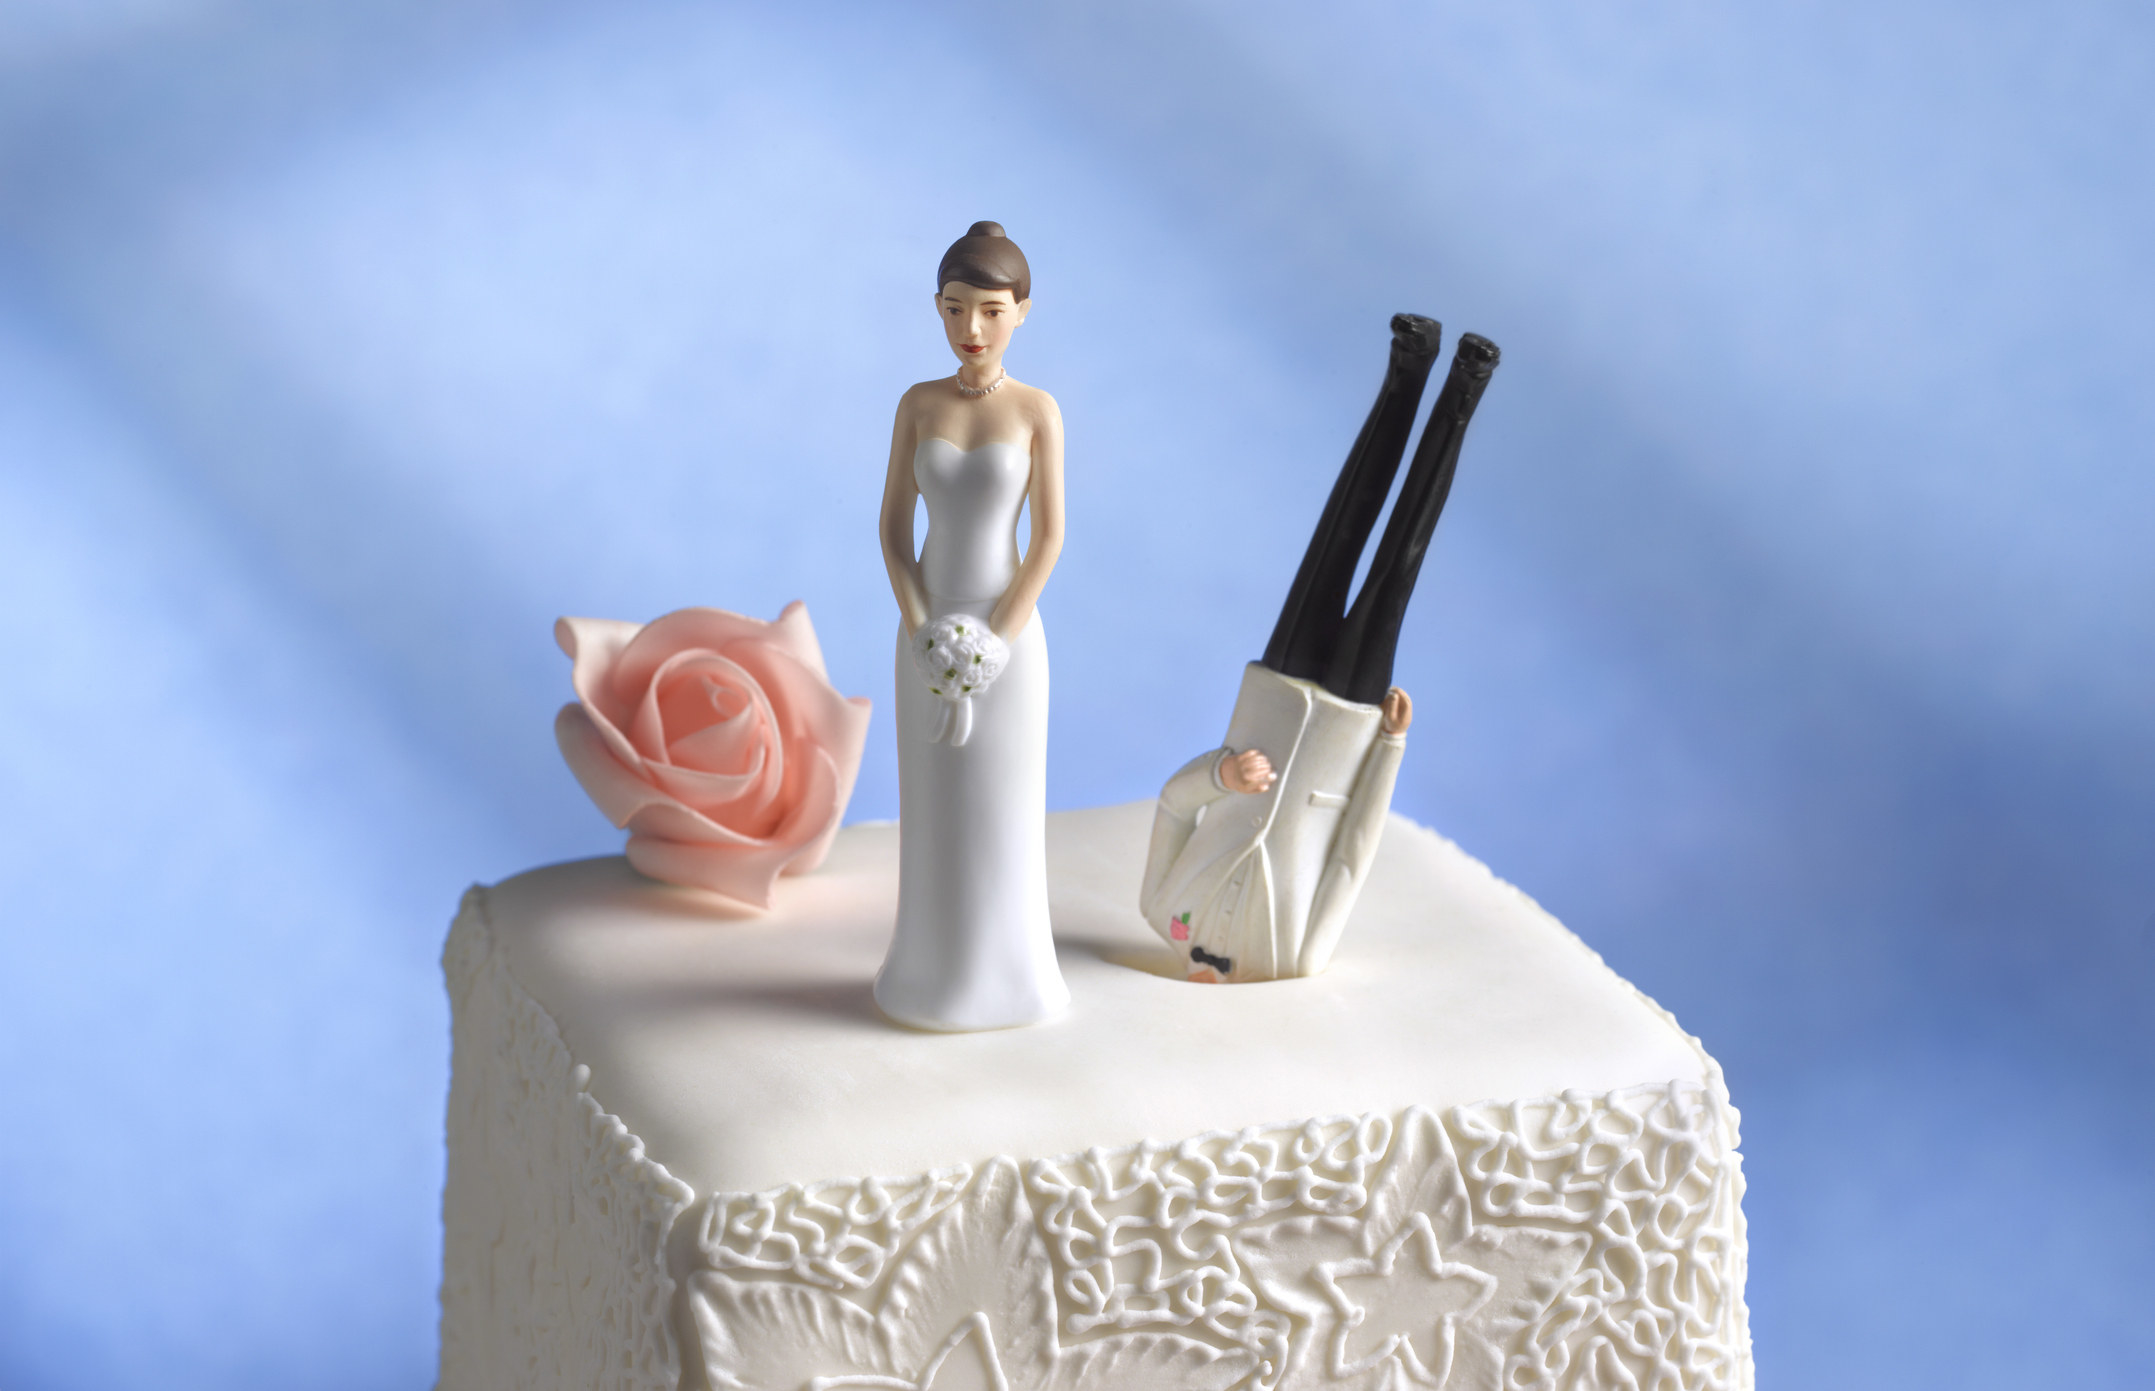 Bride figurine on the top of a cake, next to an upside down groom figure with head in the cake